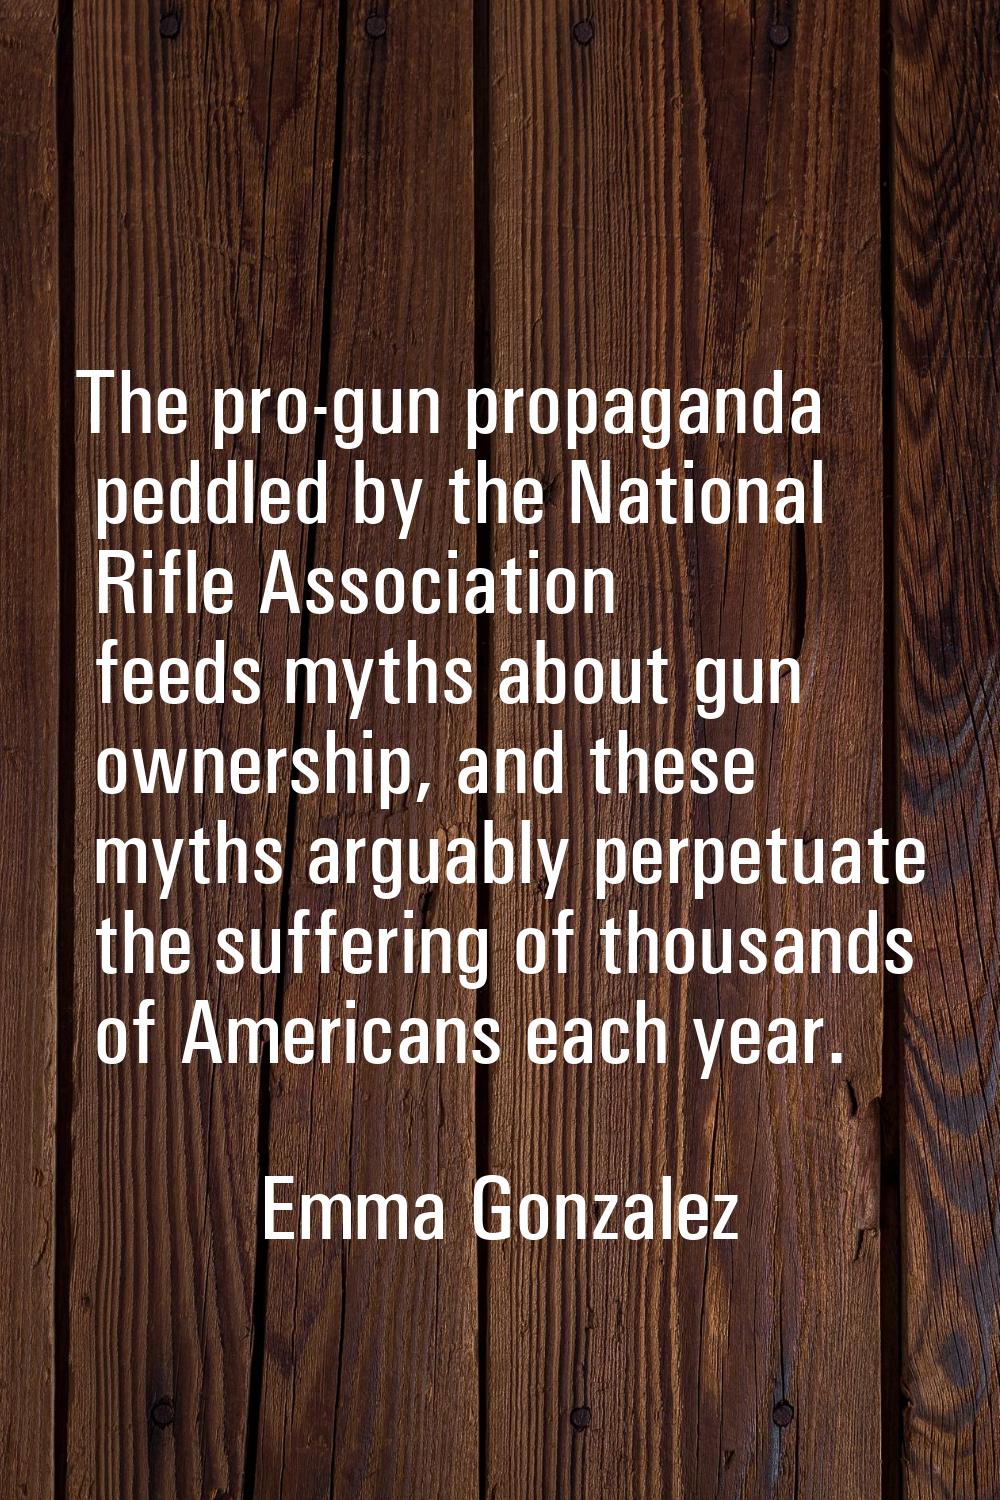 The pro-gun propaganda peddled by the National Rifle Association feeds myths about gun ownership, a